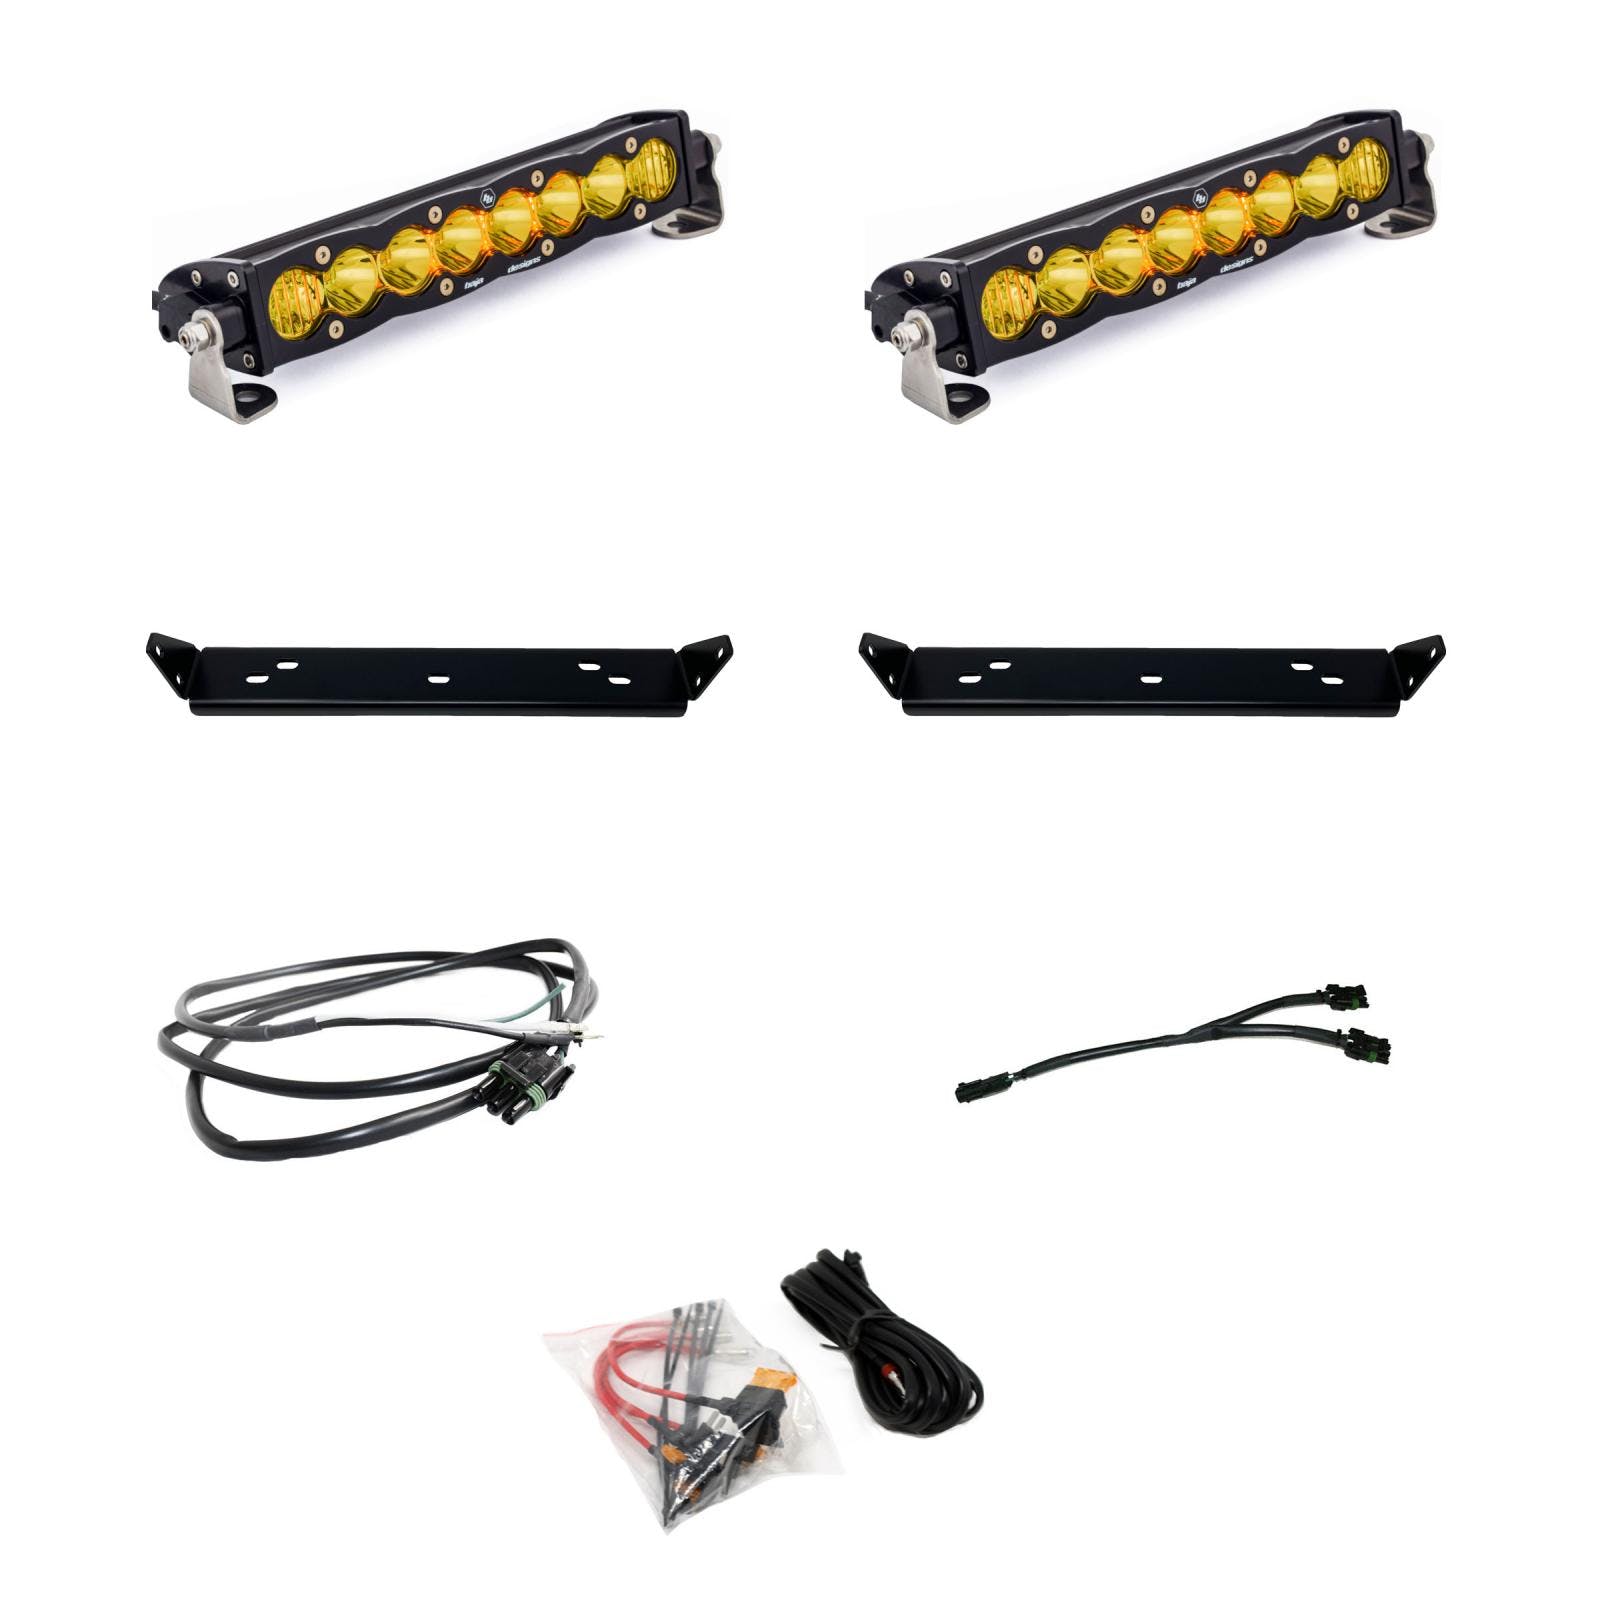 Baja Designs 448066 10 Inch S8 D/C Amber Behind Grill Kit